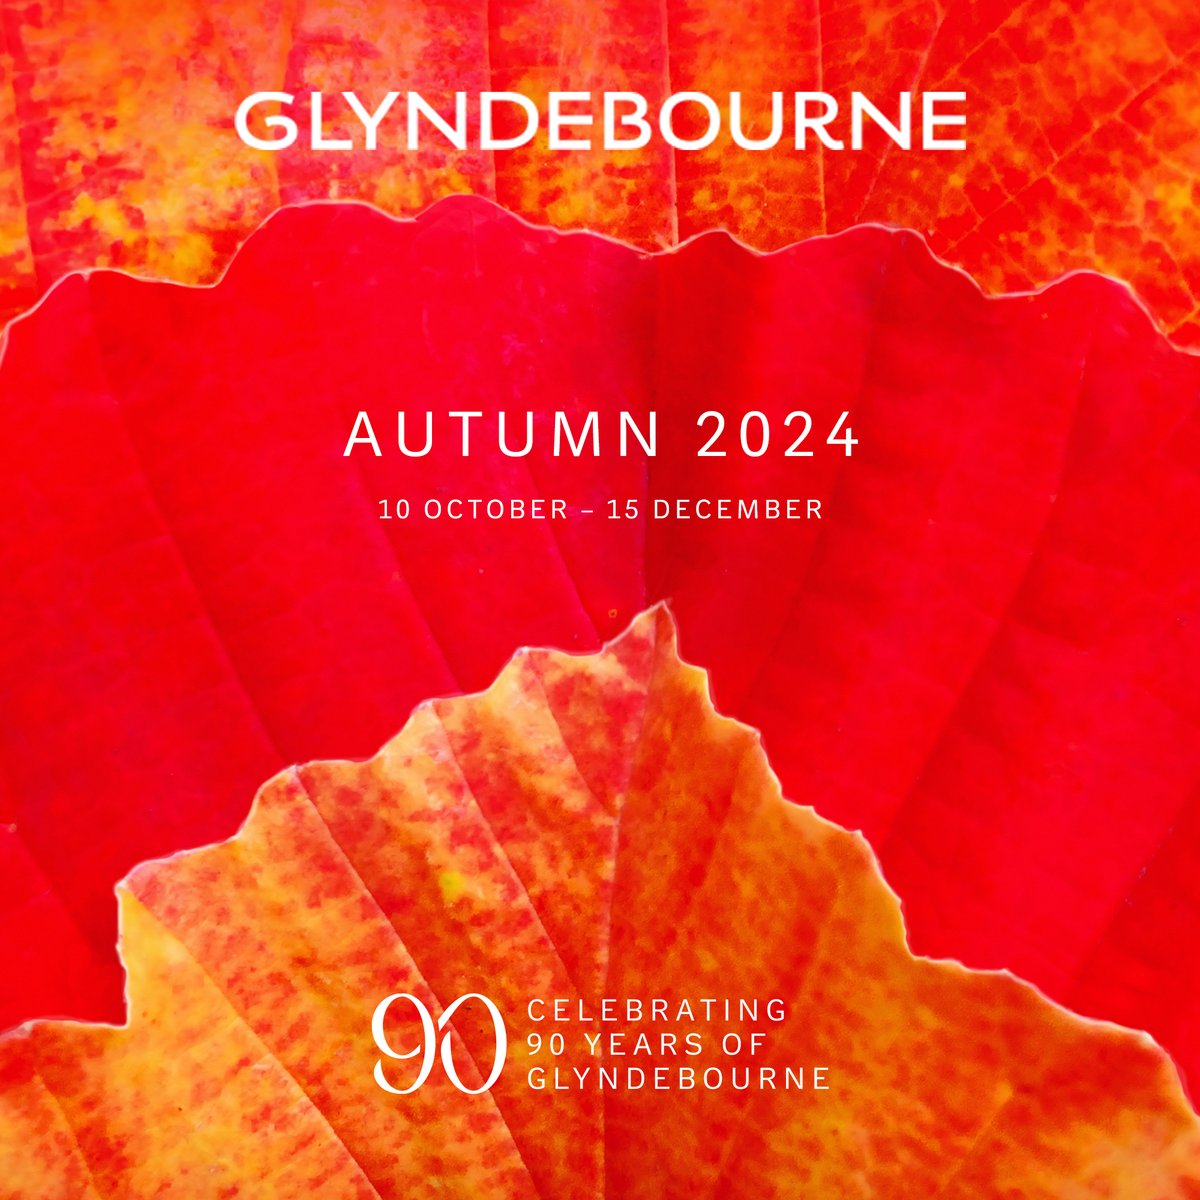 Booking for Autumn 2024 is now open! Choose from two contrasting operas this autumn, from laugh-out-loud comedy in Il turco in Italia to romance and heartbreak in La traviata. Over 14,000 tickets available under £50! Don't miss out, book now glyndebourne.com/autumn/